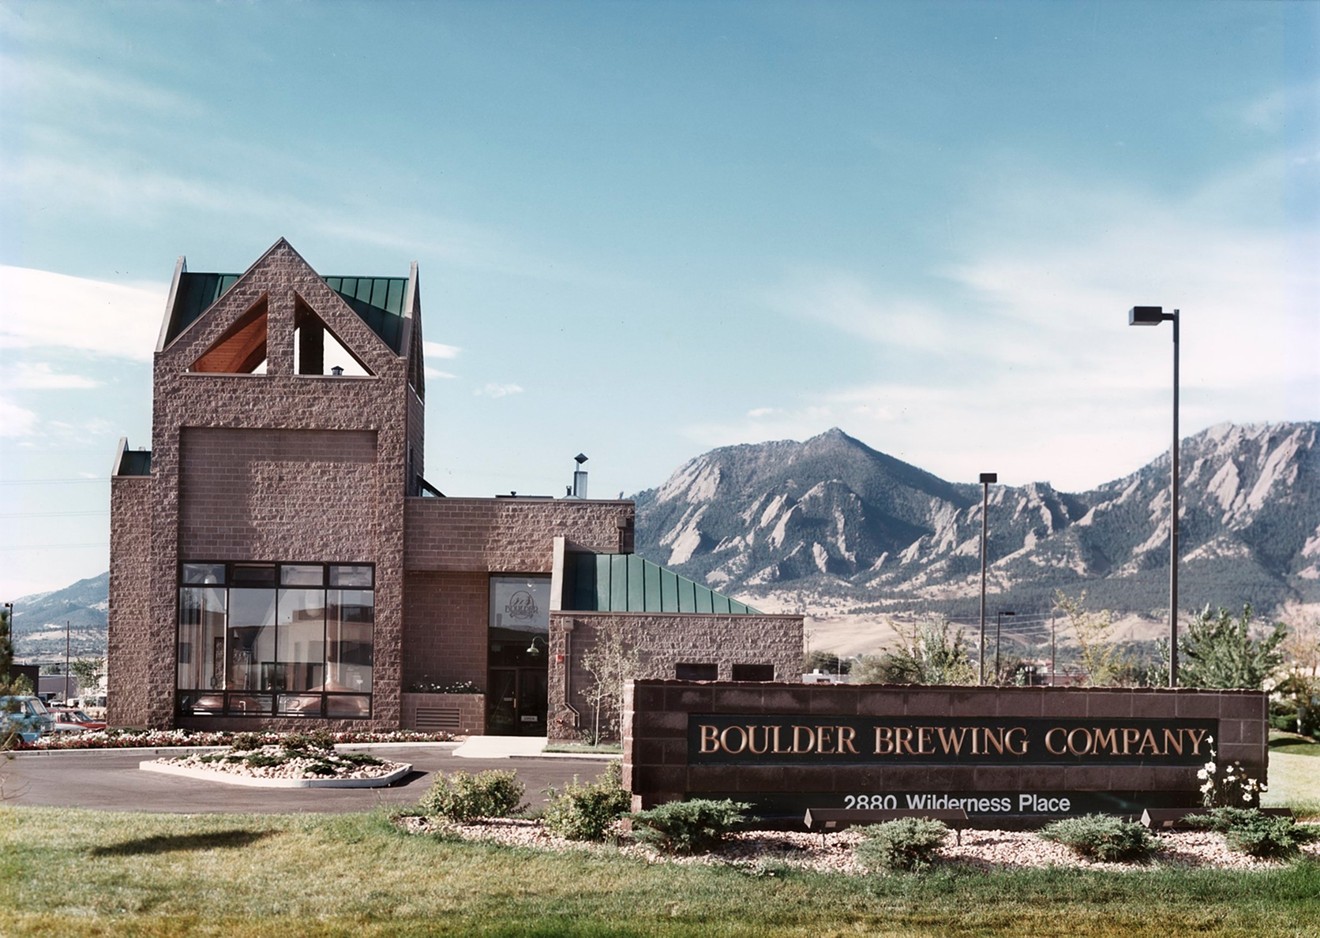 Boulder Beer will end forty years of brewing this month.